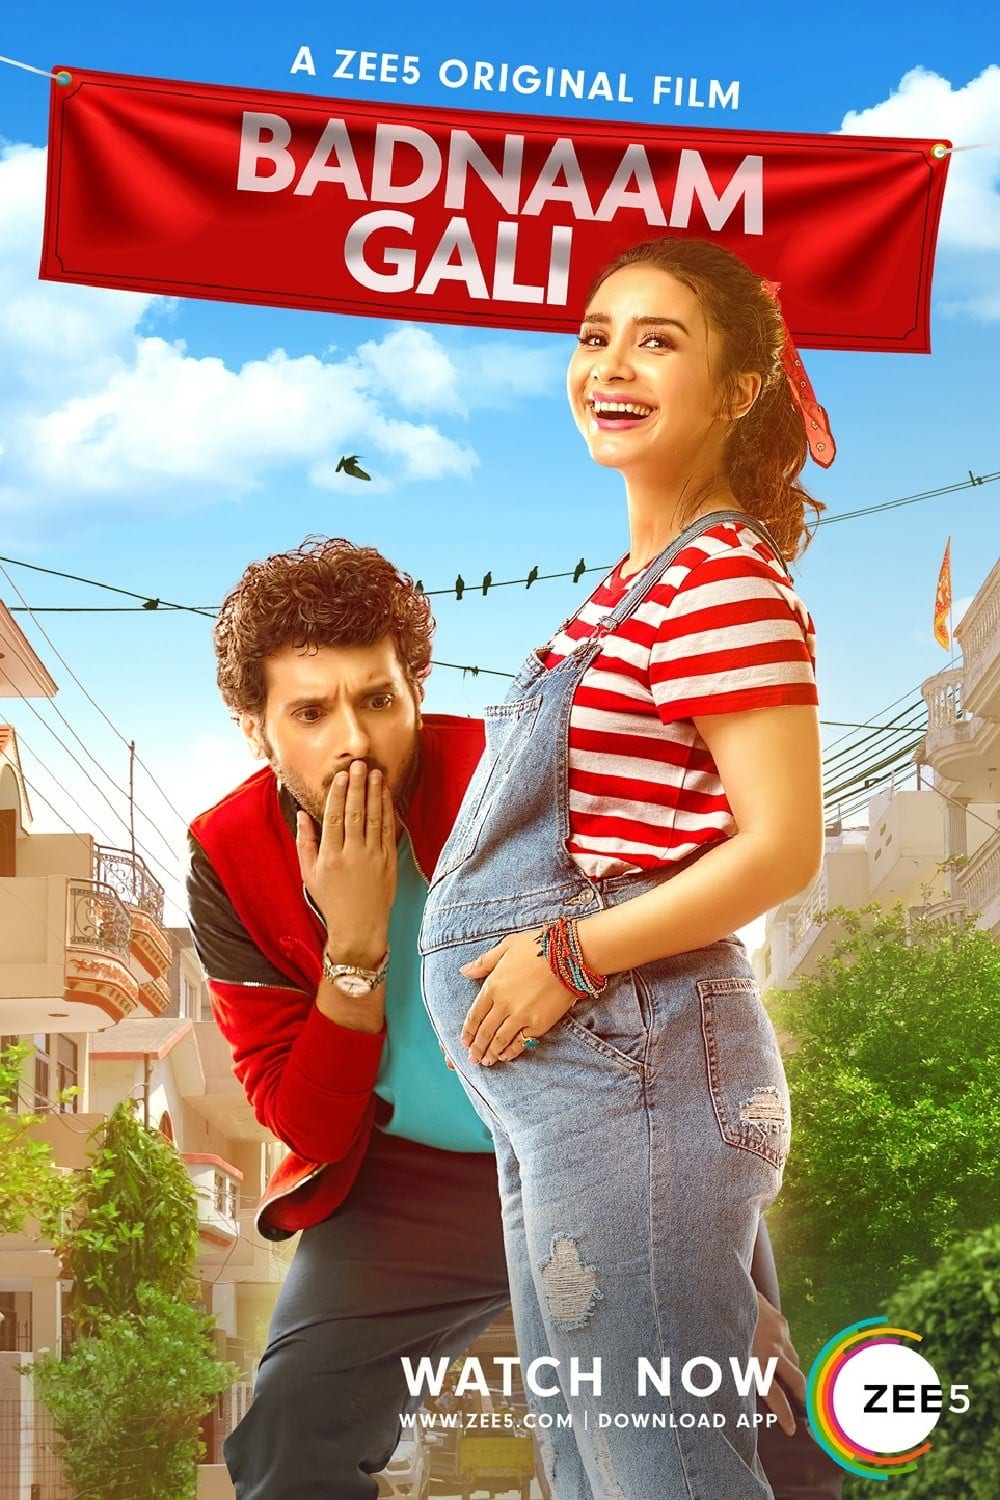 Poster for the movie "Badnaam Gali"